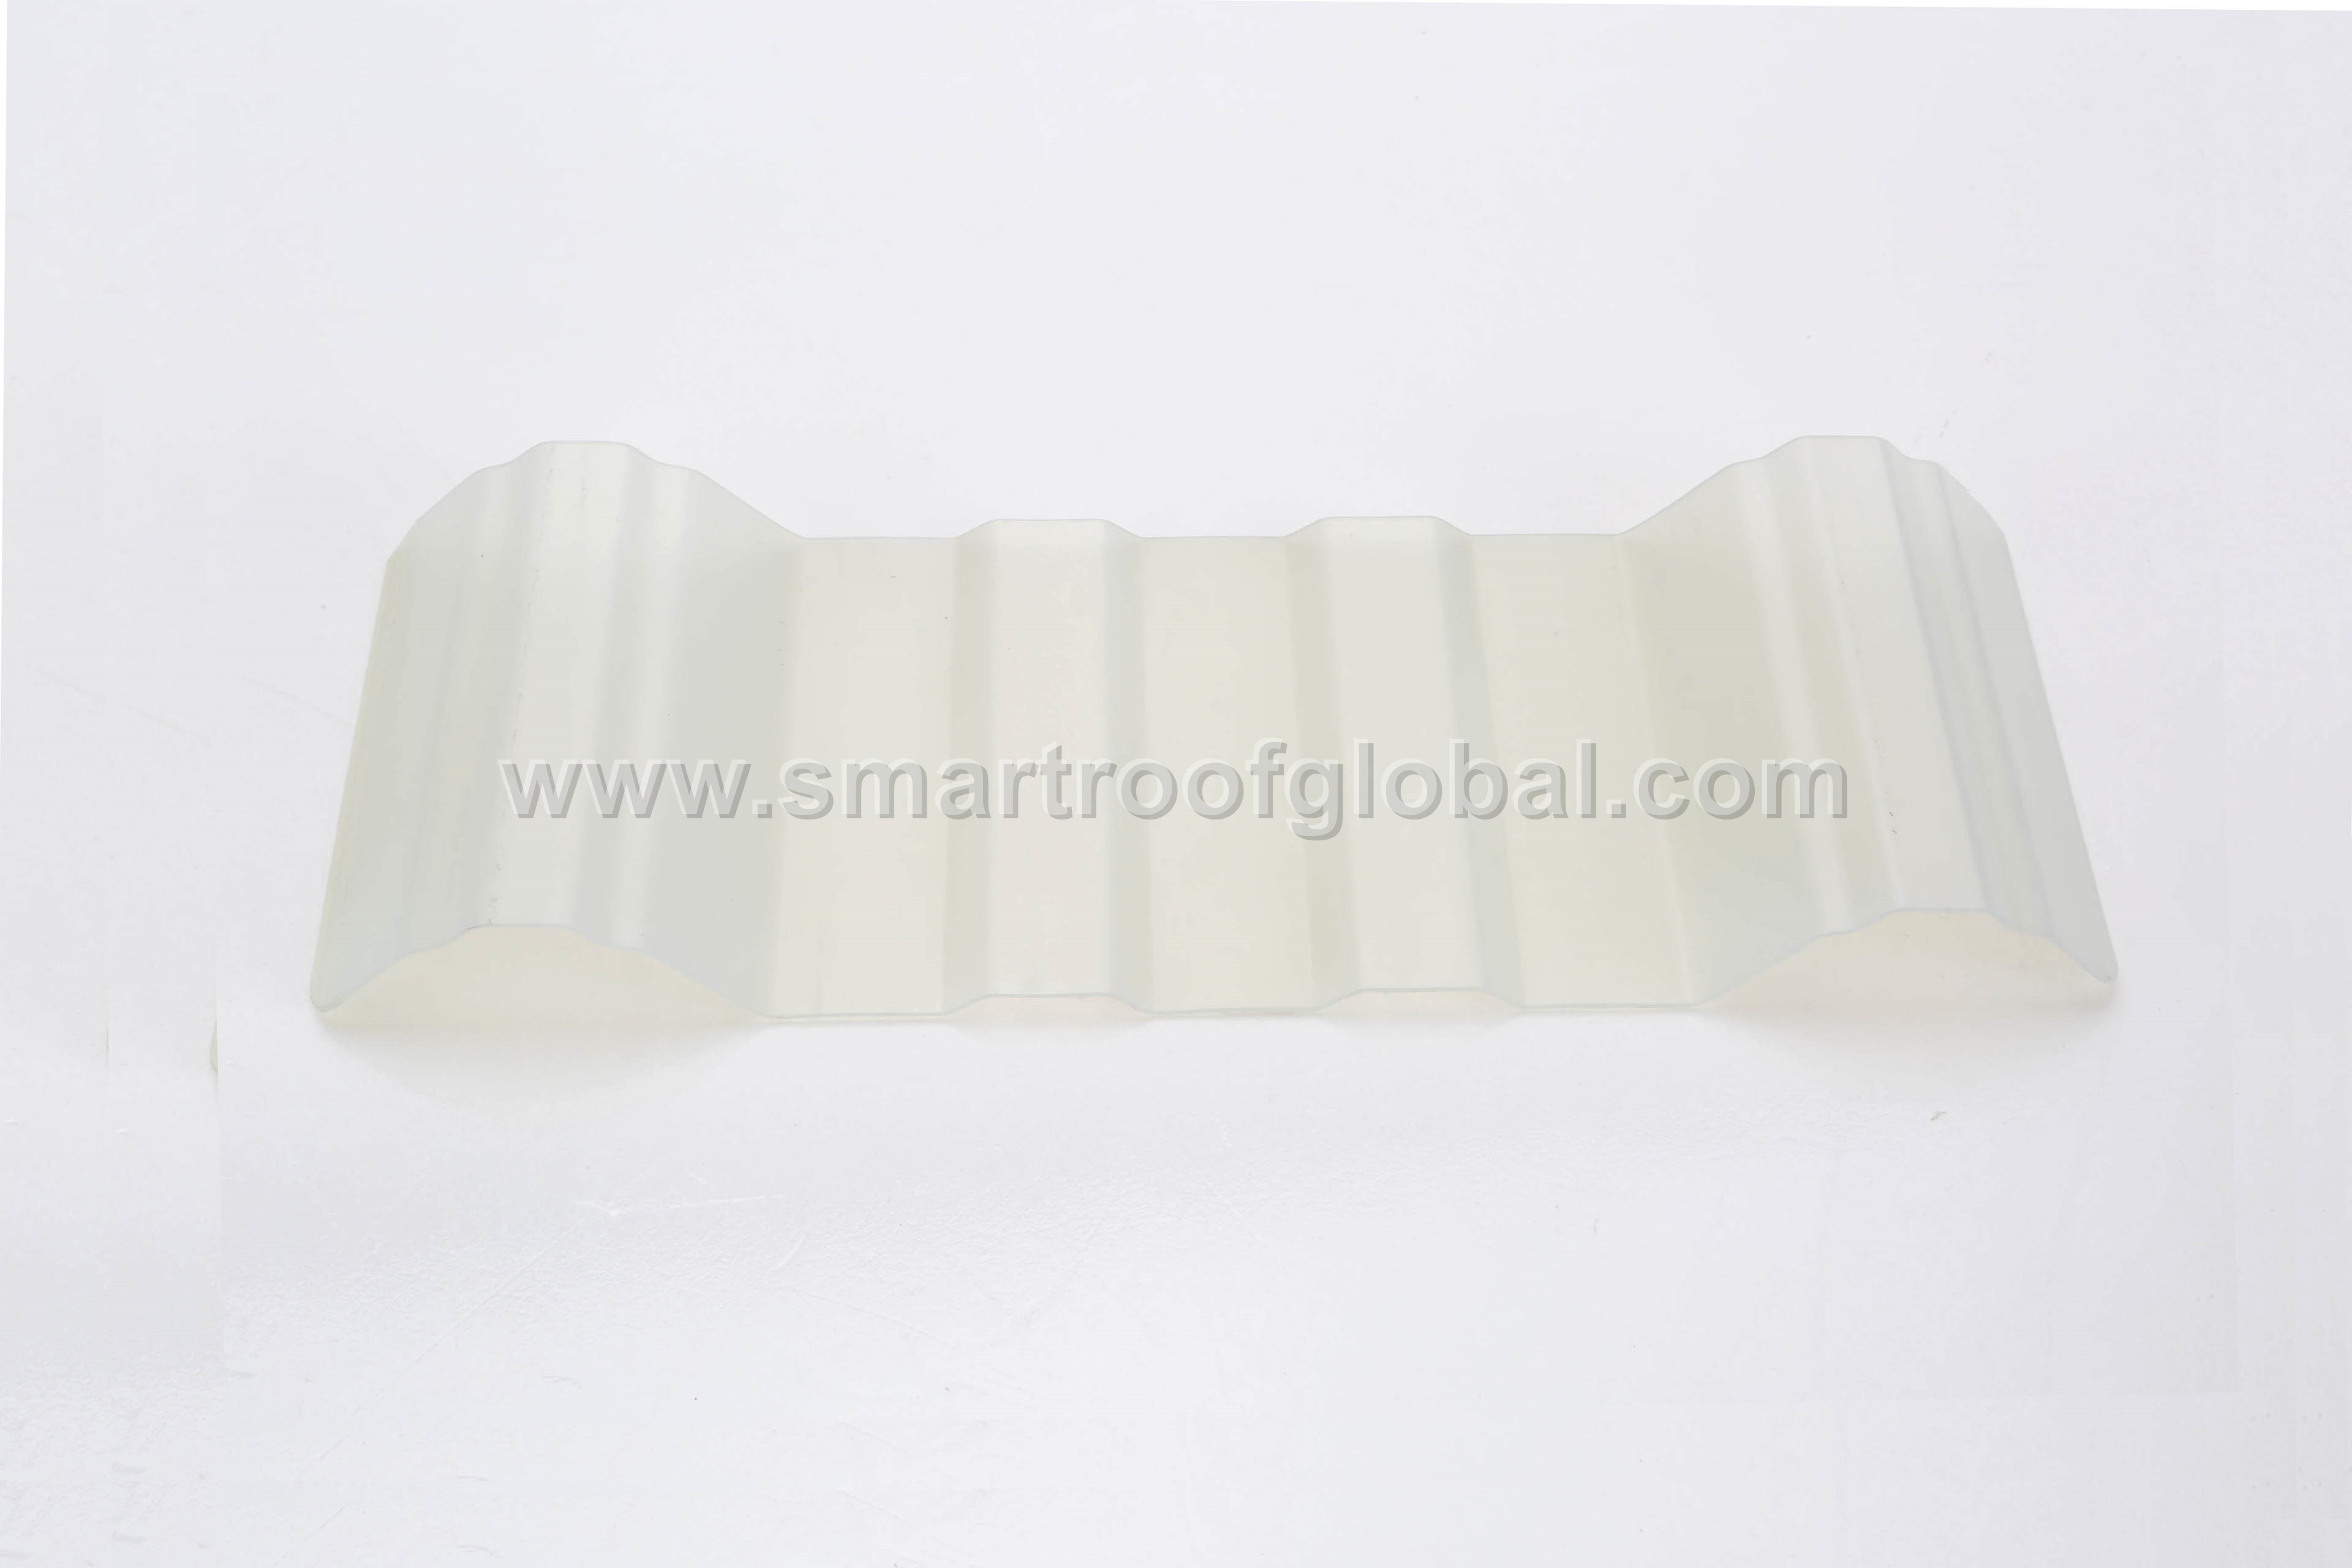 Well-designed Resin Roofing Tile - Clear Corrugated Plastic – Smartroof